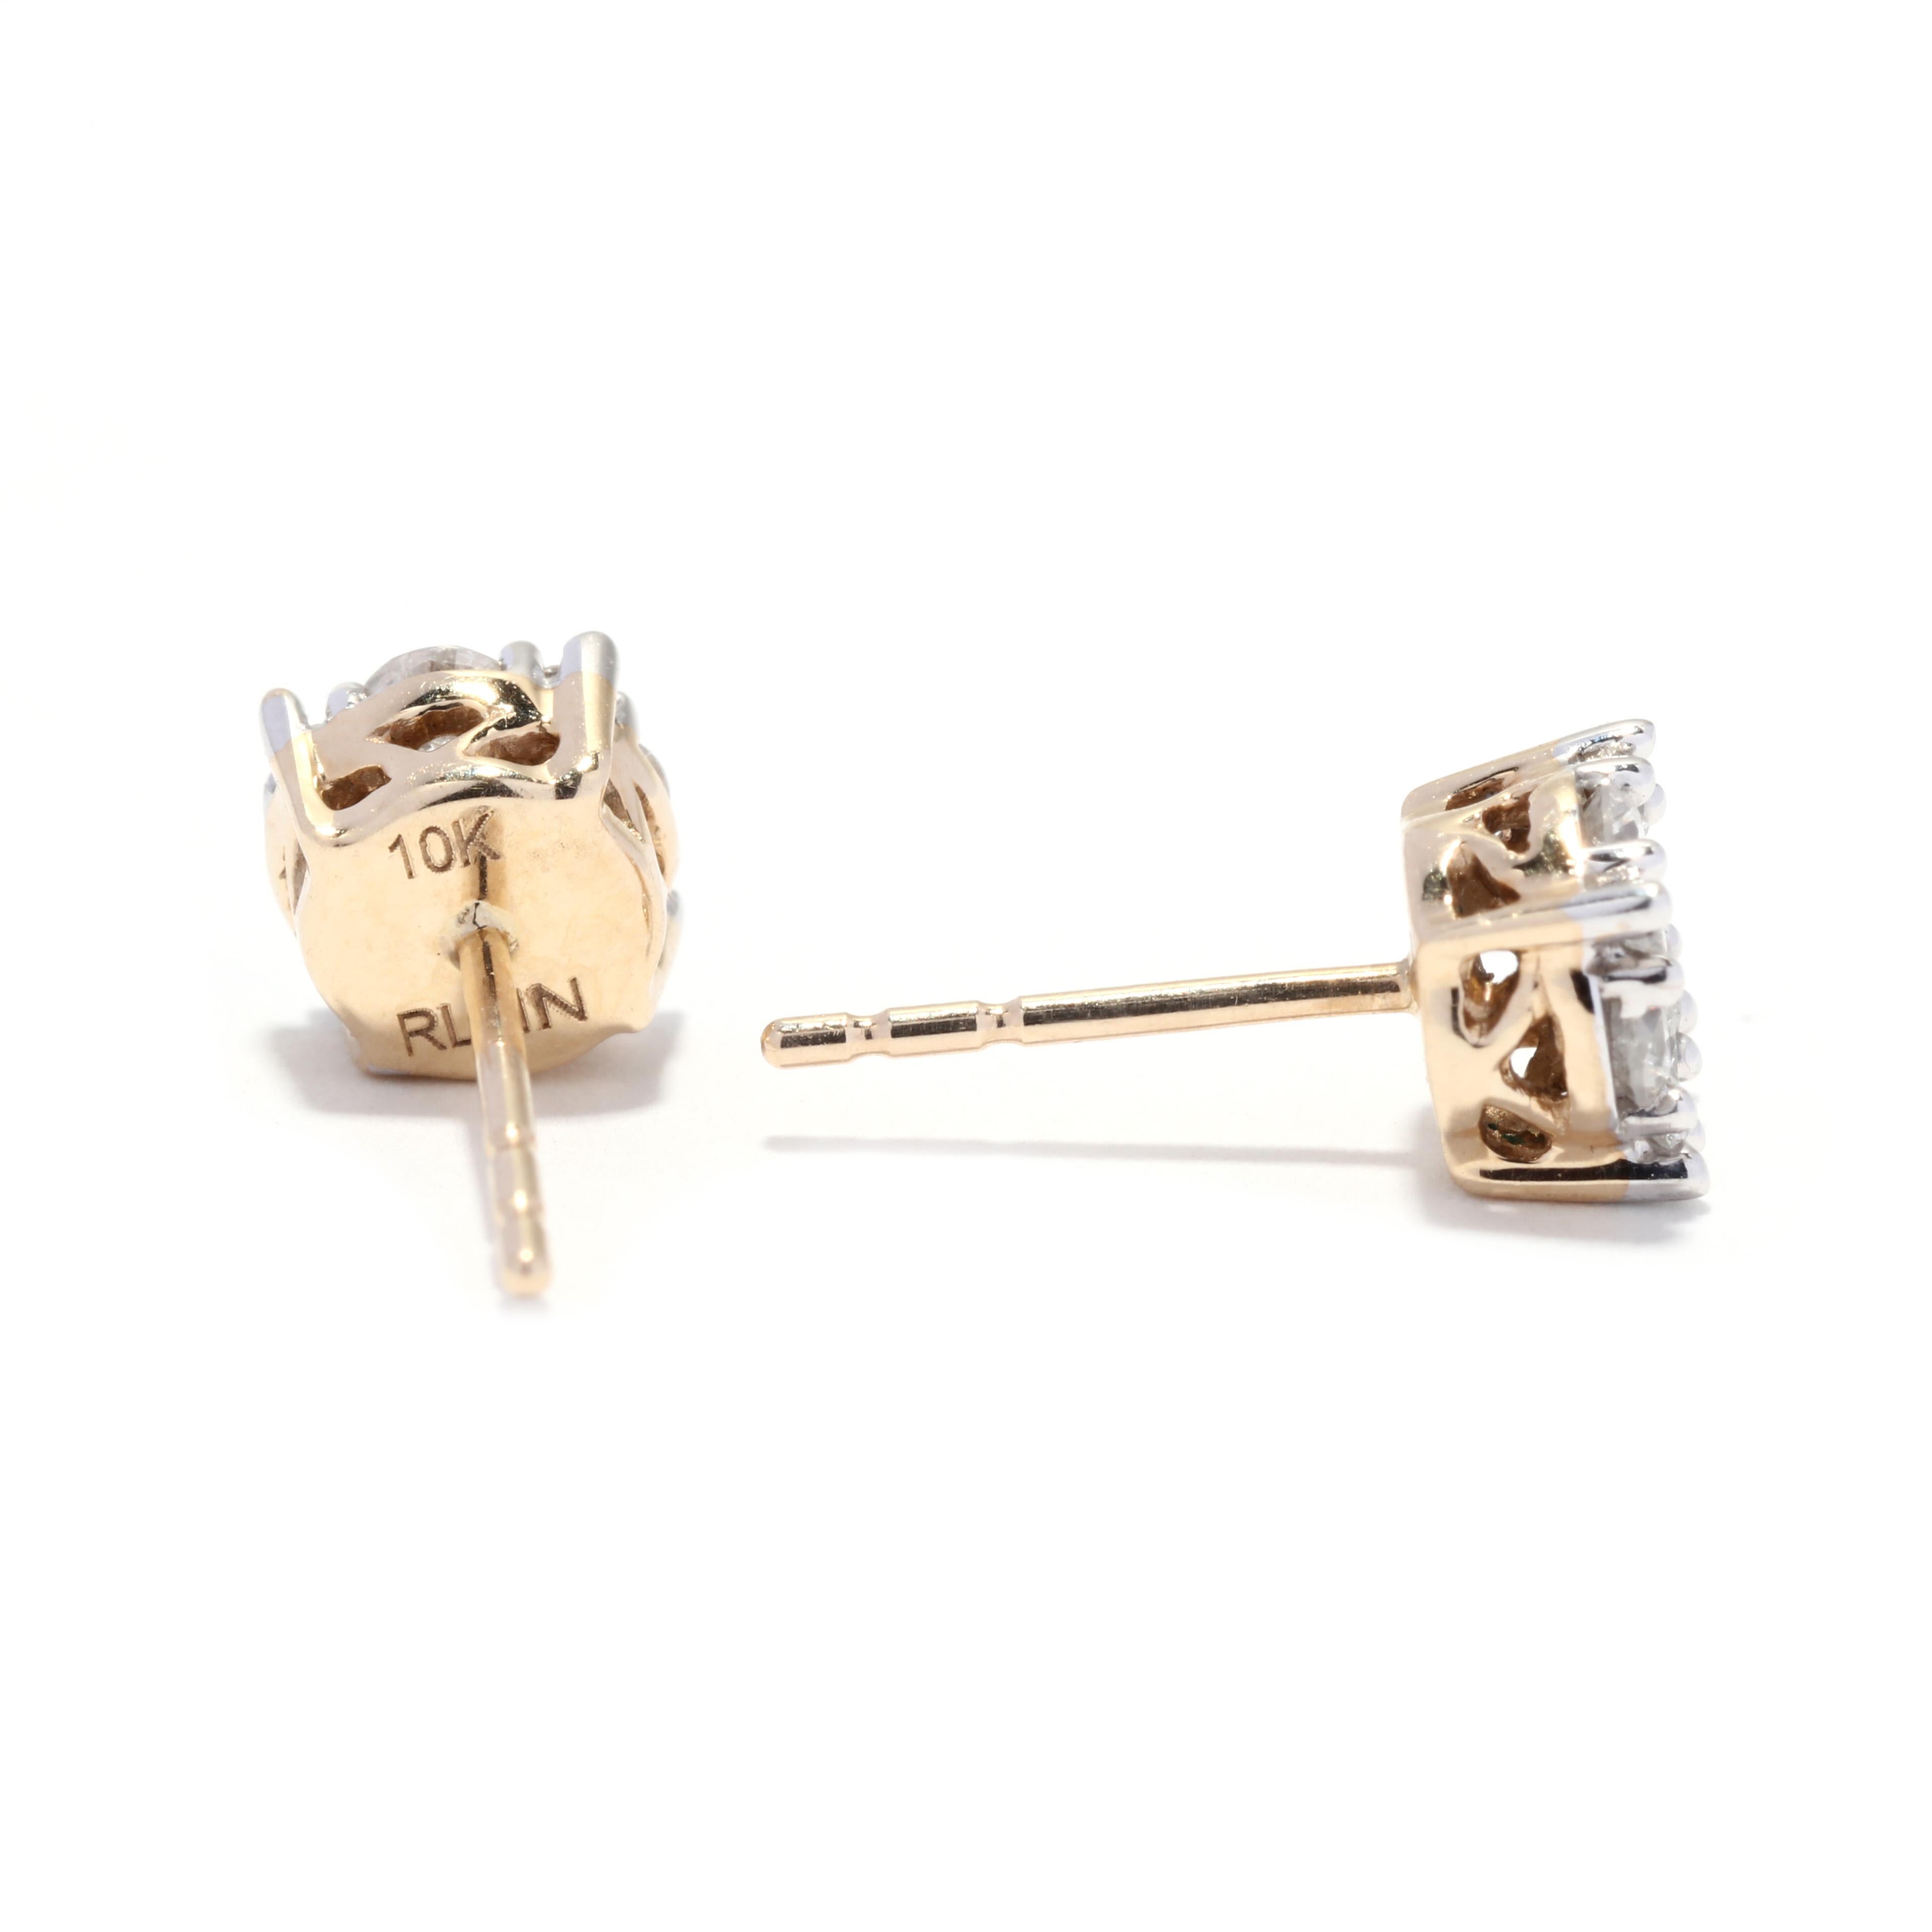 A pair of vintage 10 karat gold cluster diamond stud earrings. These simple diamond studs feature a cluster of prong set, round brilliant cut diamonds weighing approximately 1/2 total carats and with pierced push backs.

Stones: 
- diamonds, 18